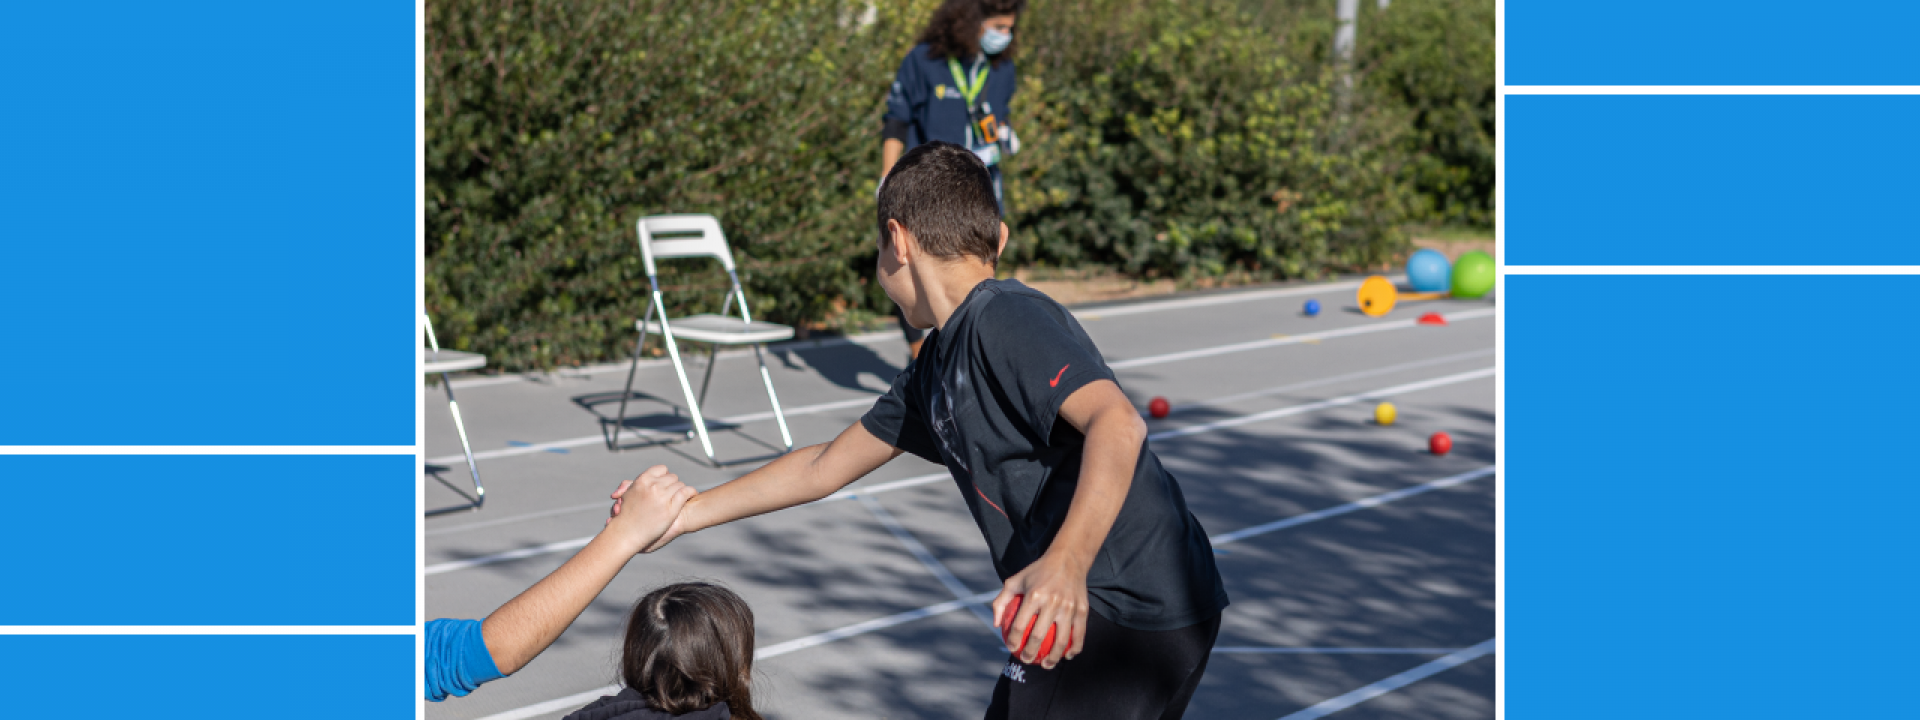  Schools at the SNFCC | Getting to know Autism through Sports  - Εικόνα